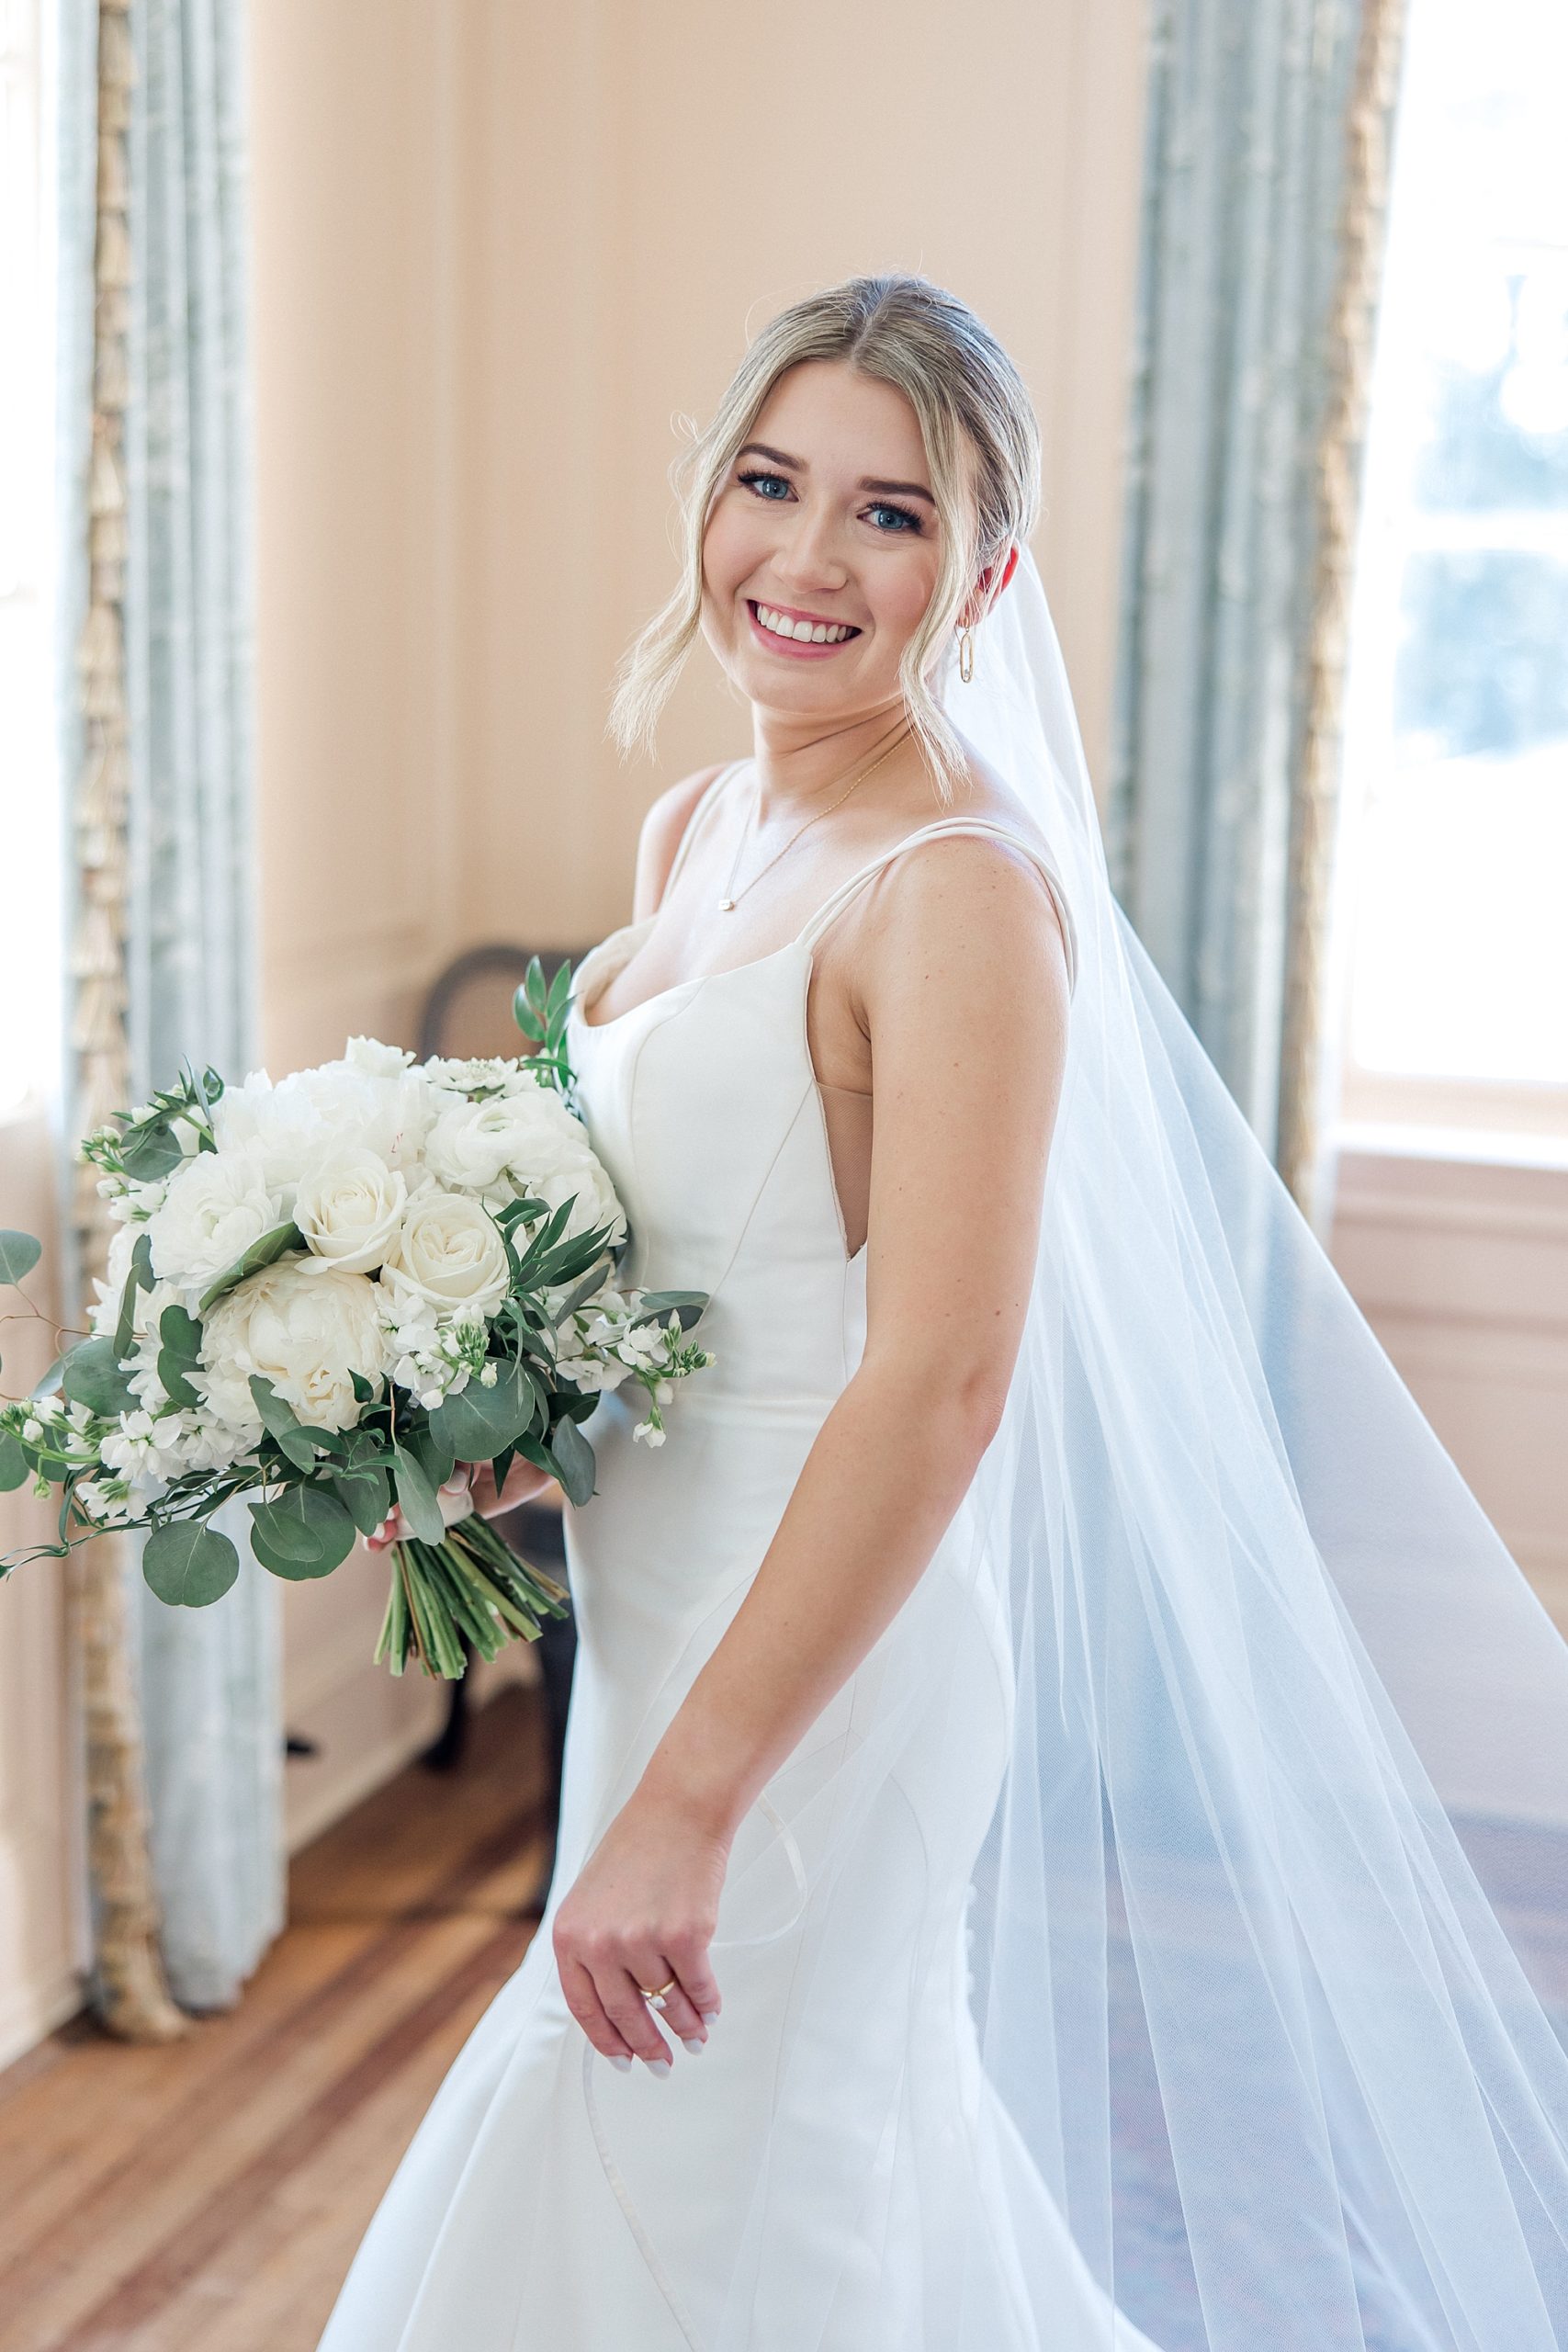 bride in wedding dress holding white and green wedding bouquet